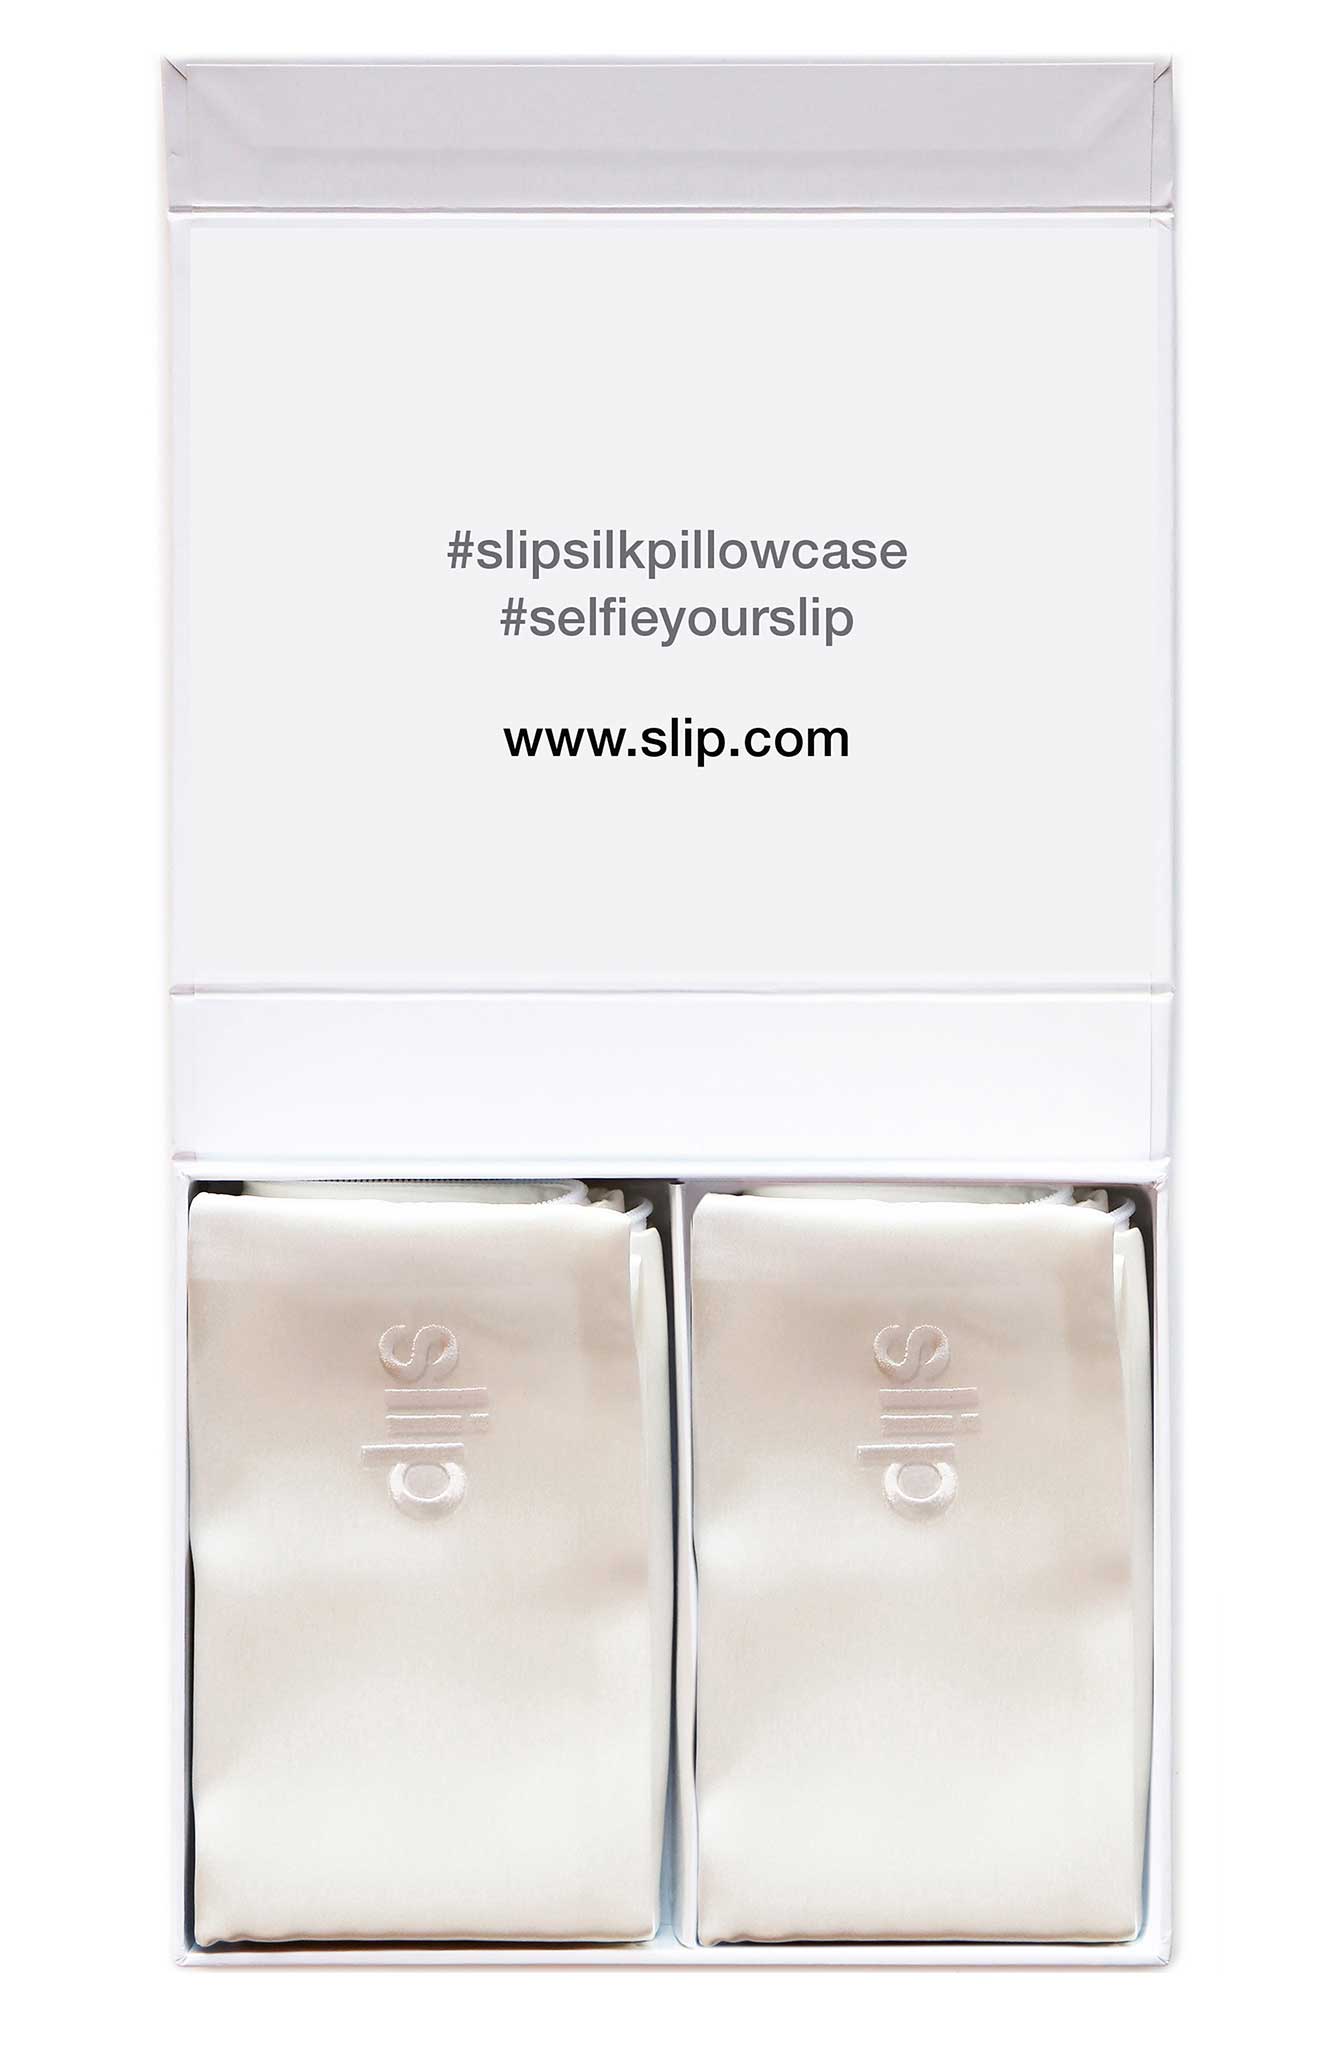 Slip Silk Queen Pillowcase Duo: Believe the hype! Sleeping on silk is one of the best things you can do for your skin and your hair. It is less absorbent than other pillow materials and keep products where they belong, on your face and in your hair.